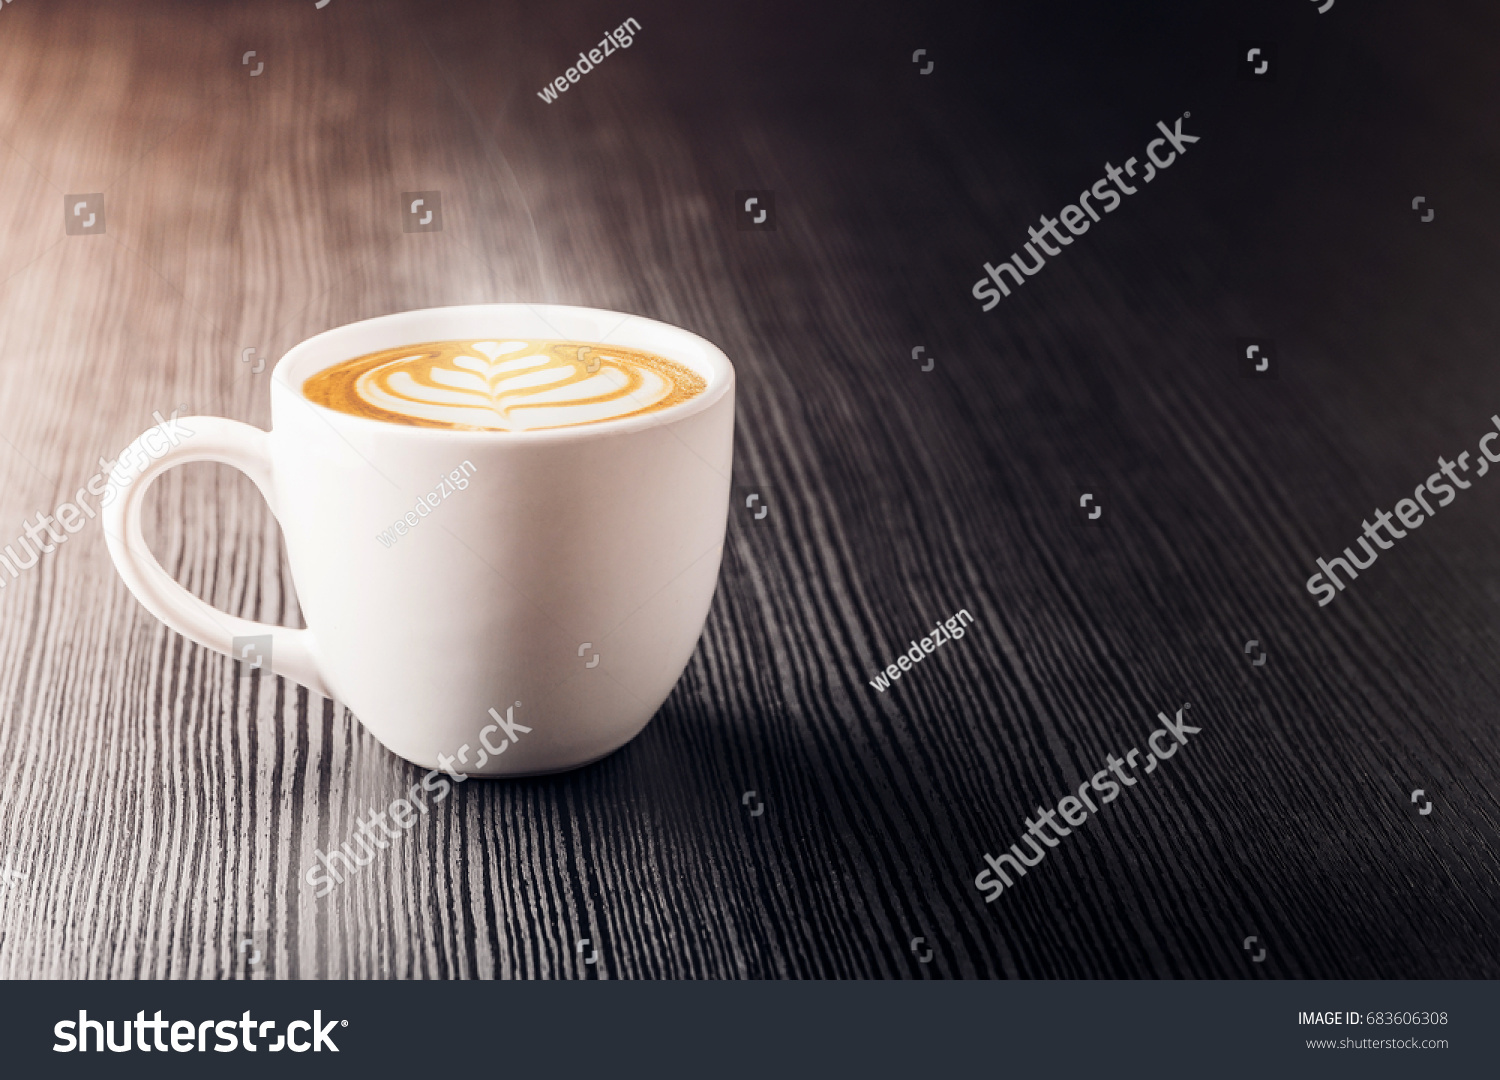 Close up white coffee cup with heart shape latte art foam on black wood table near window with light shade on tabletop at cafe. #683606308